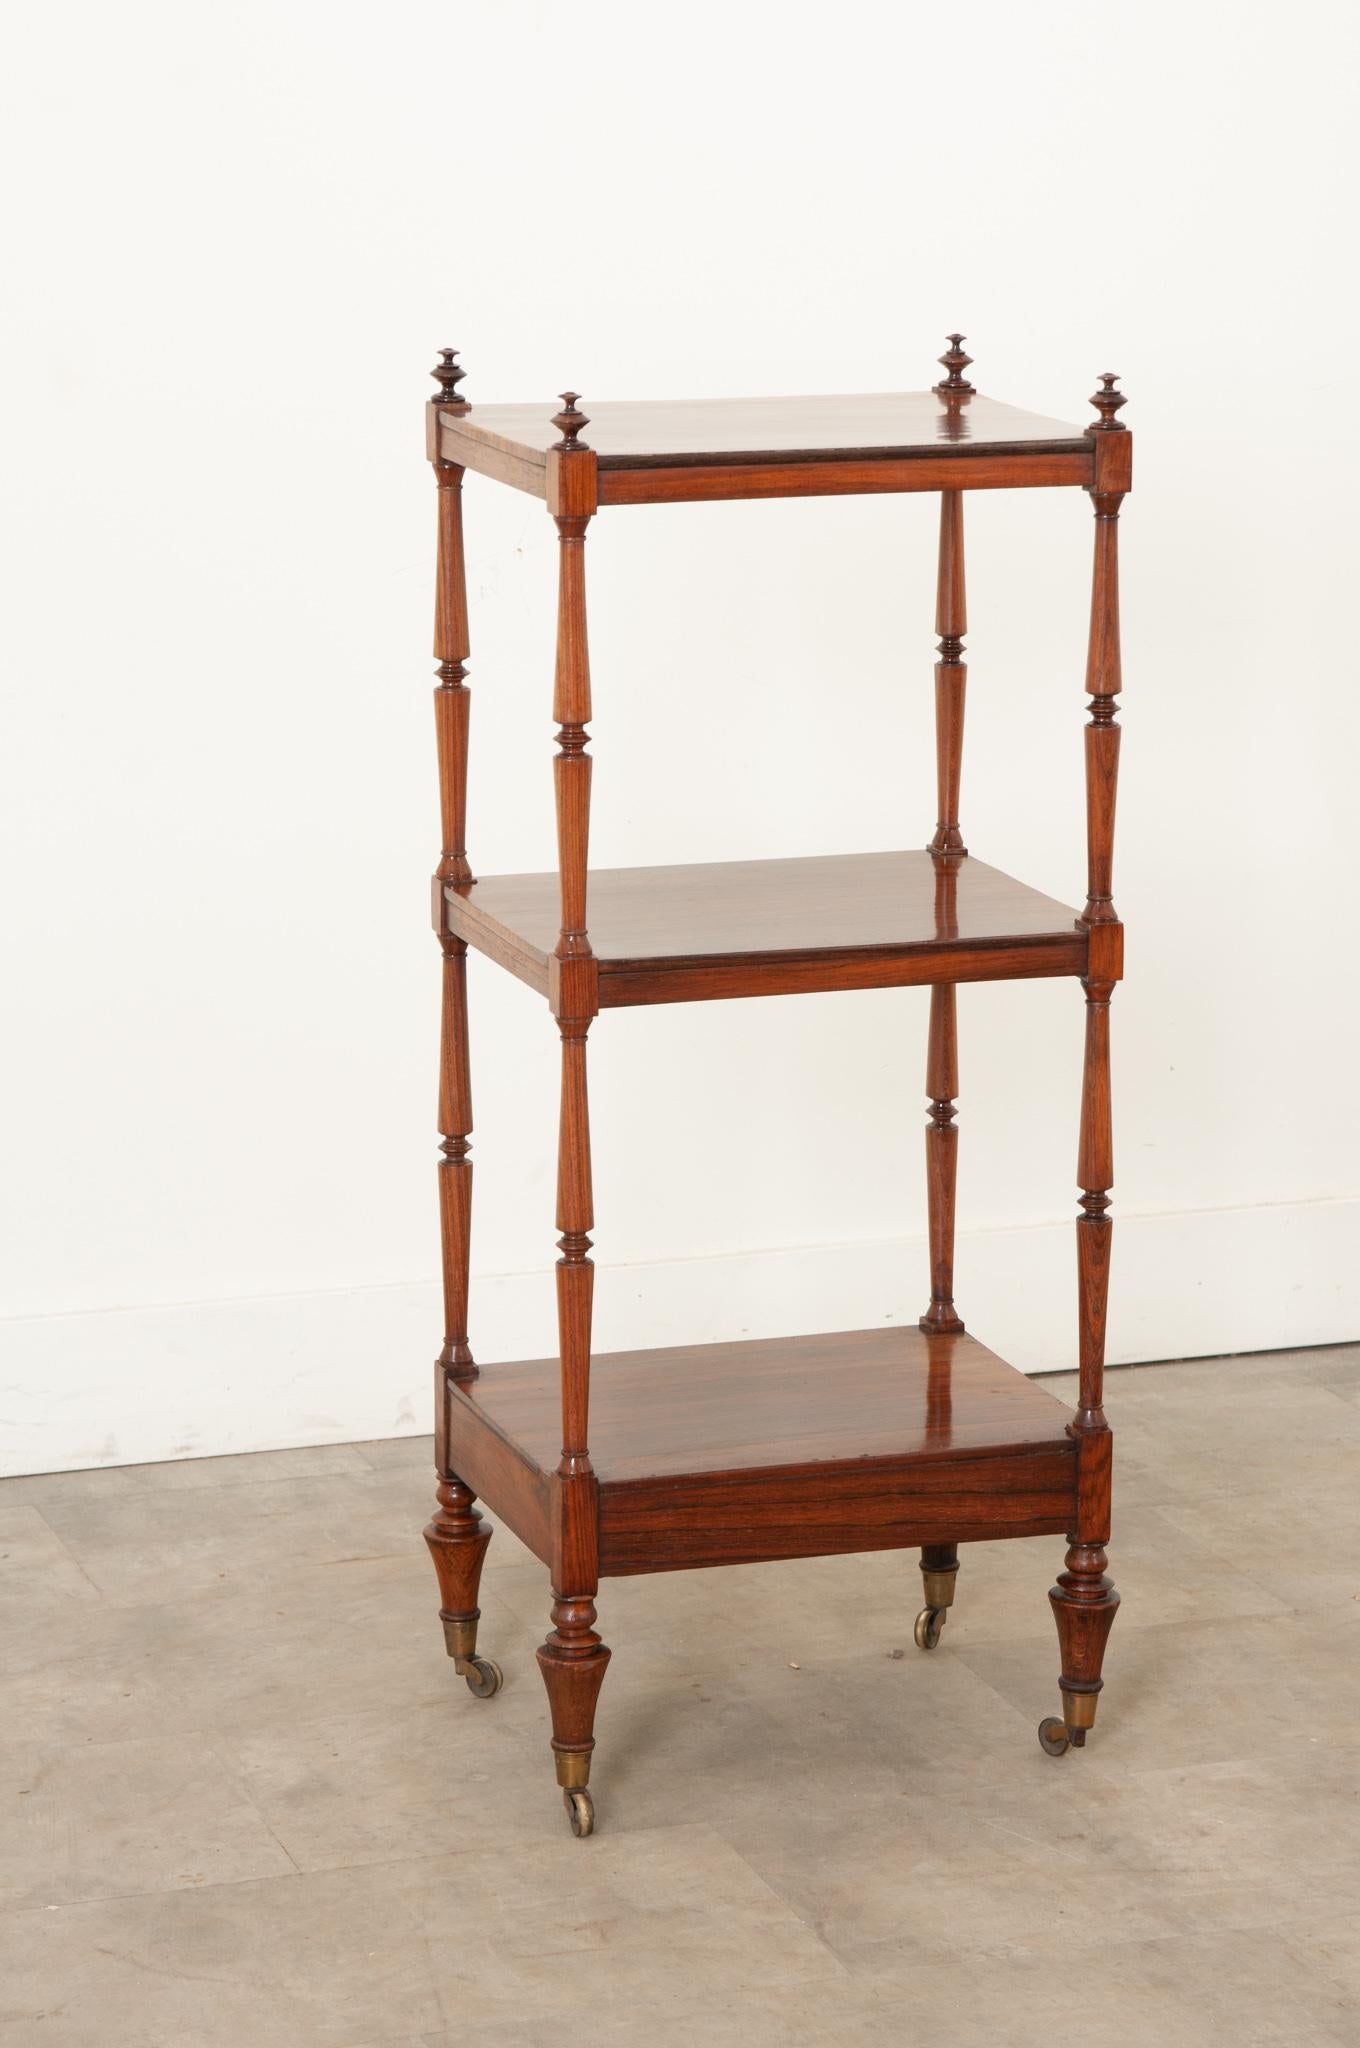 A smart etagere made of solid rosewood is the perfect addition to any interior. Topped with turned rosewood finials, three shelves are well spaced between the tall decorative table legs. The whole resting on its original casters. Be sure to take a